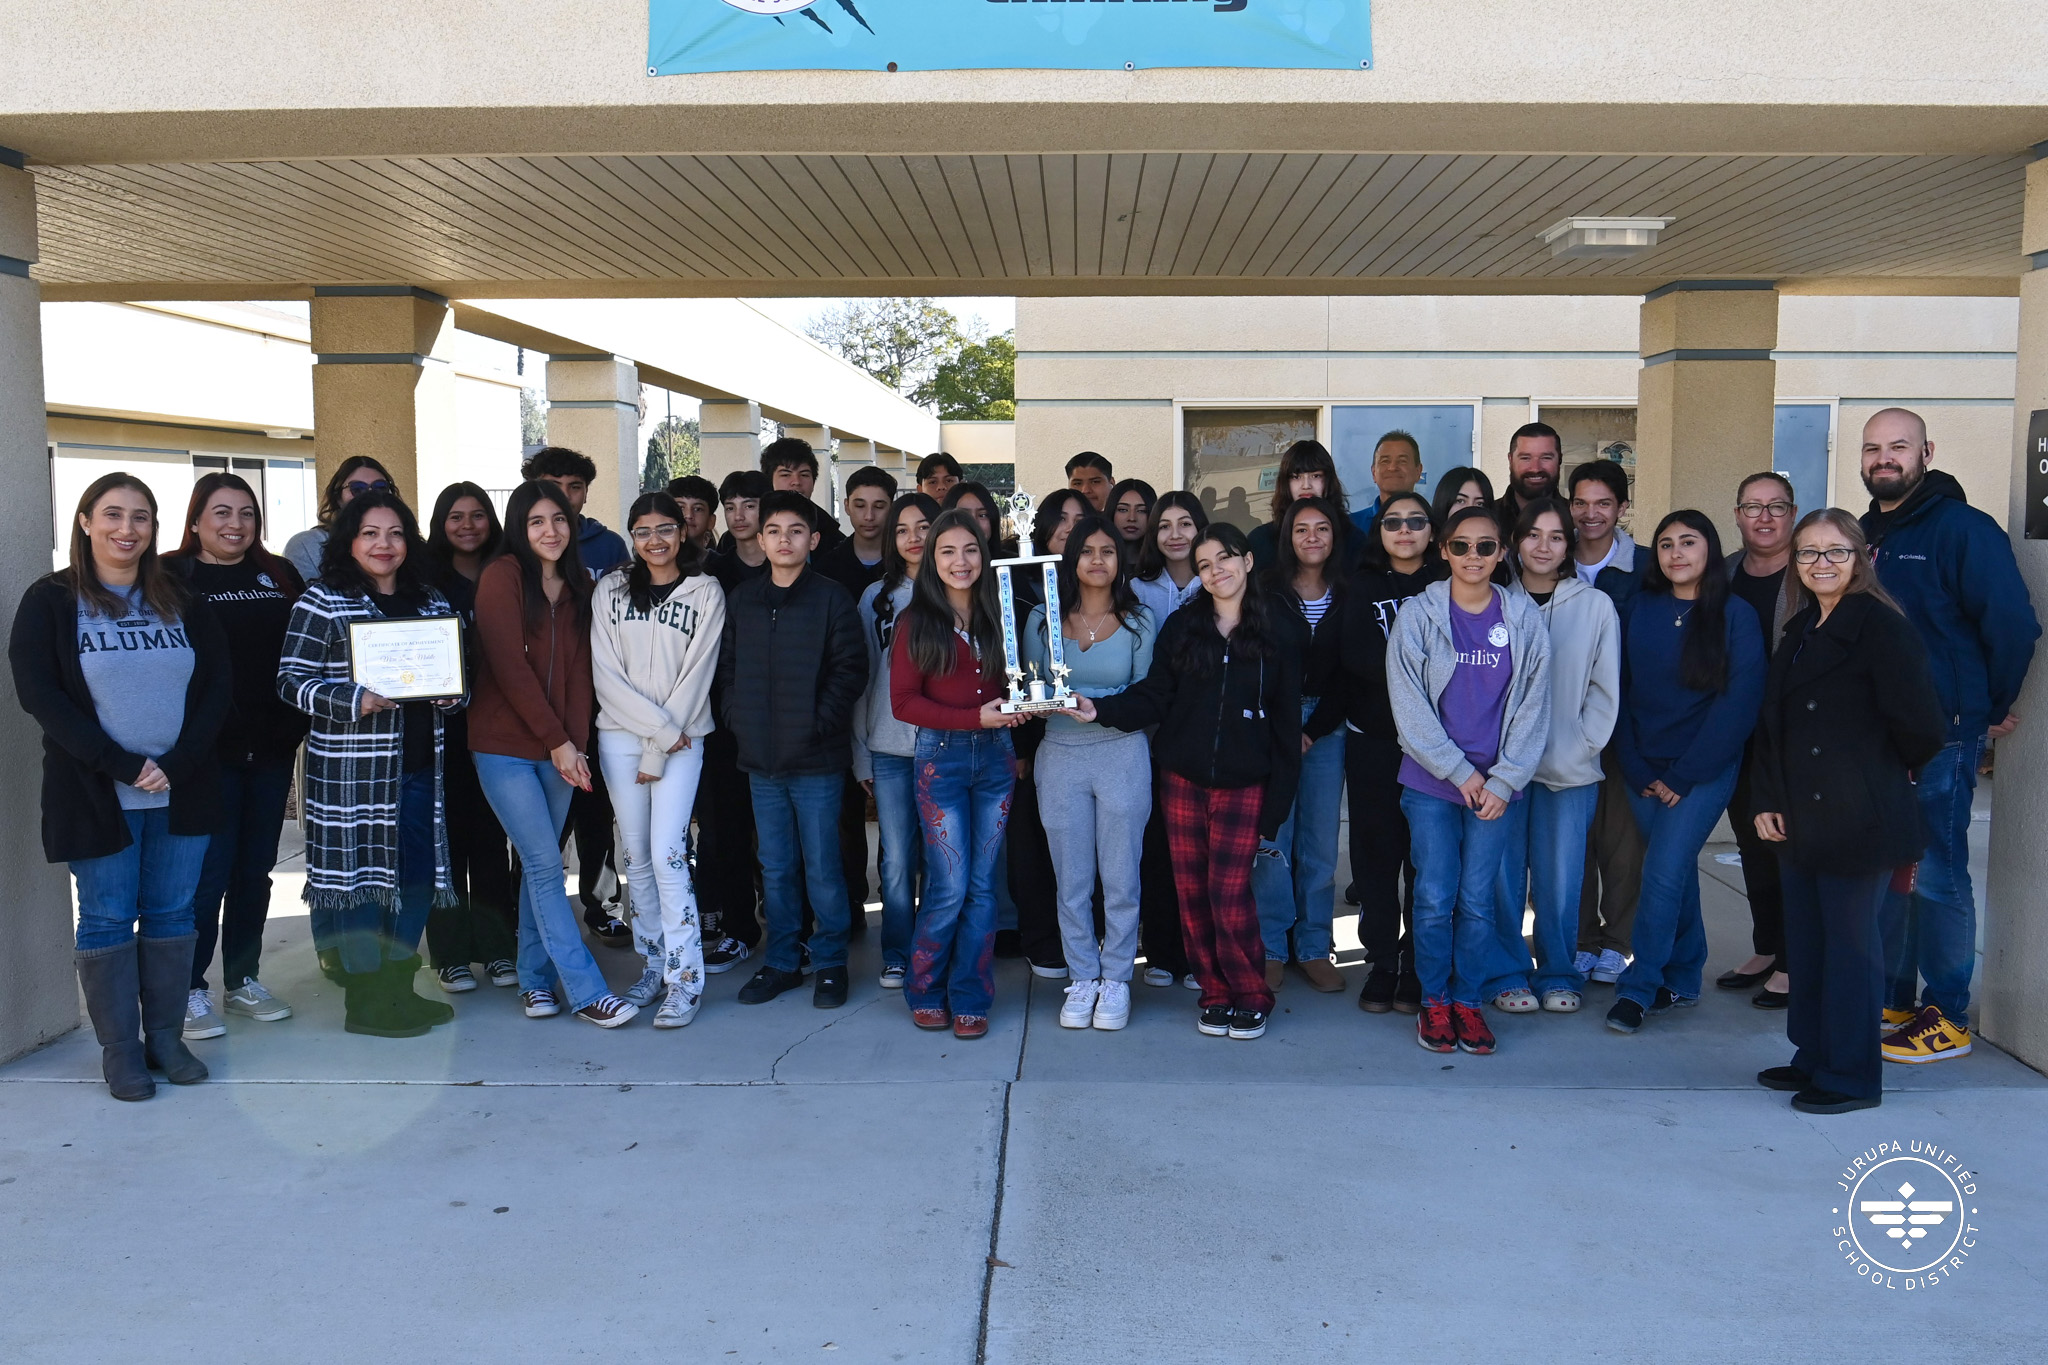 A class at MLMS with their attendance award for being the middle school with the most improved attendance